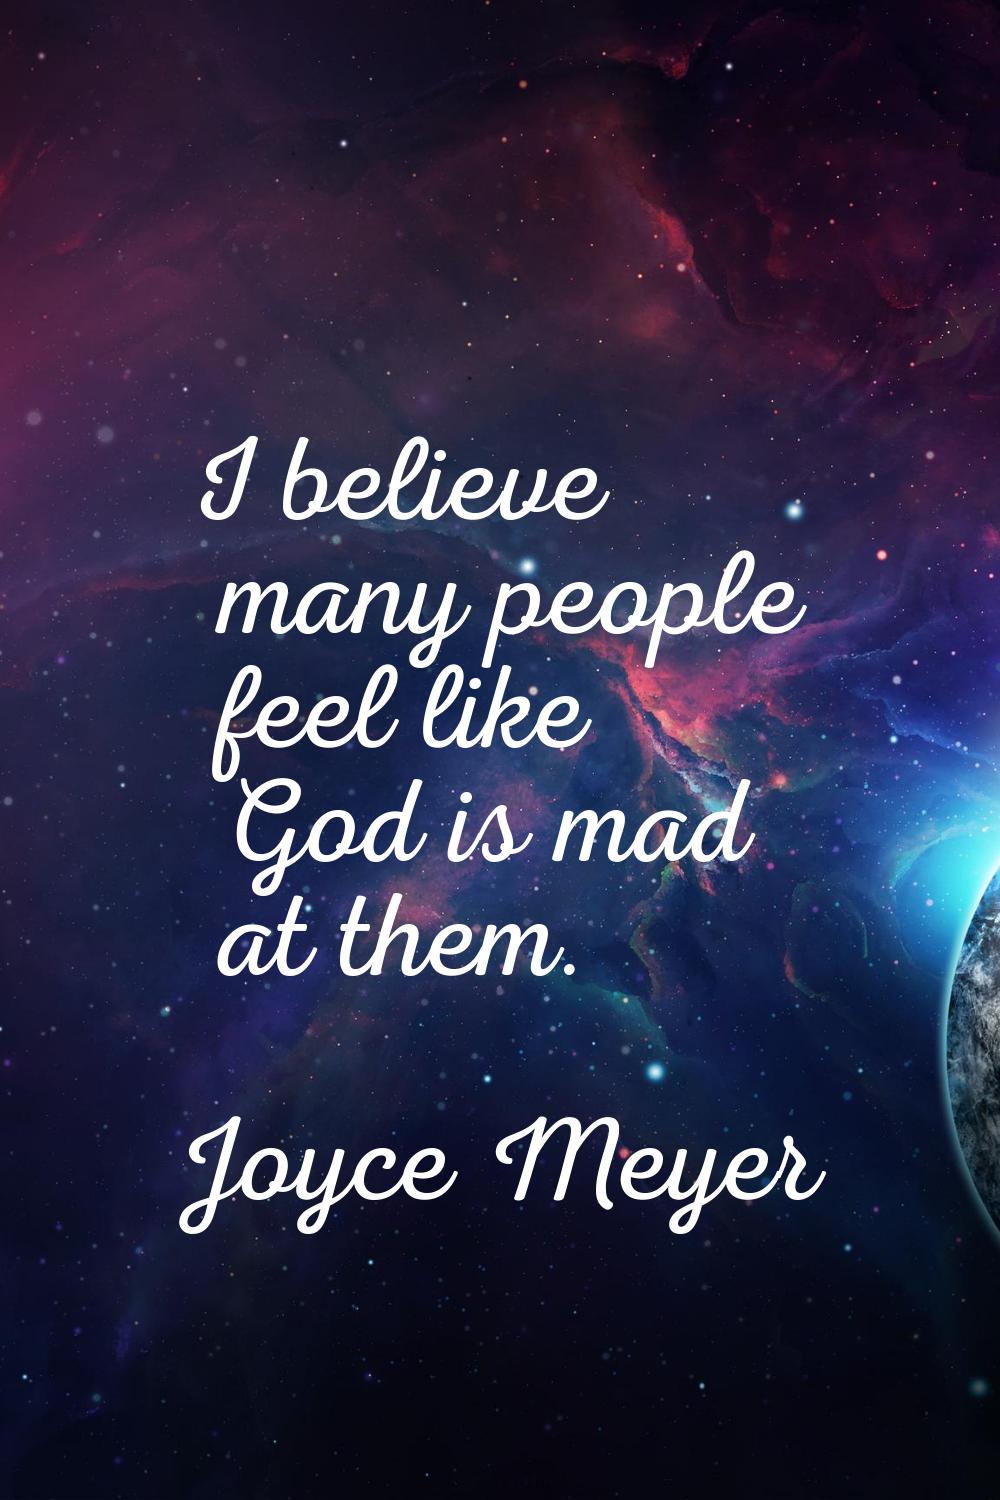 I believe many people feel like God is mad at them.